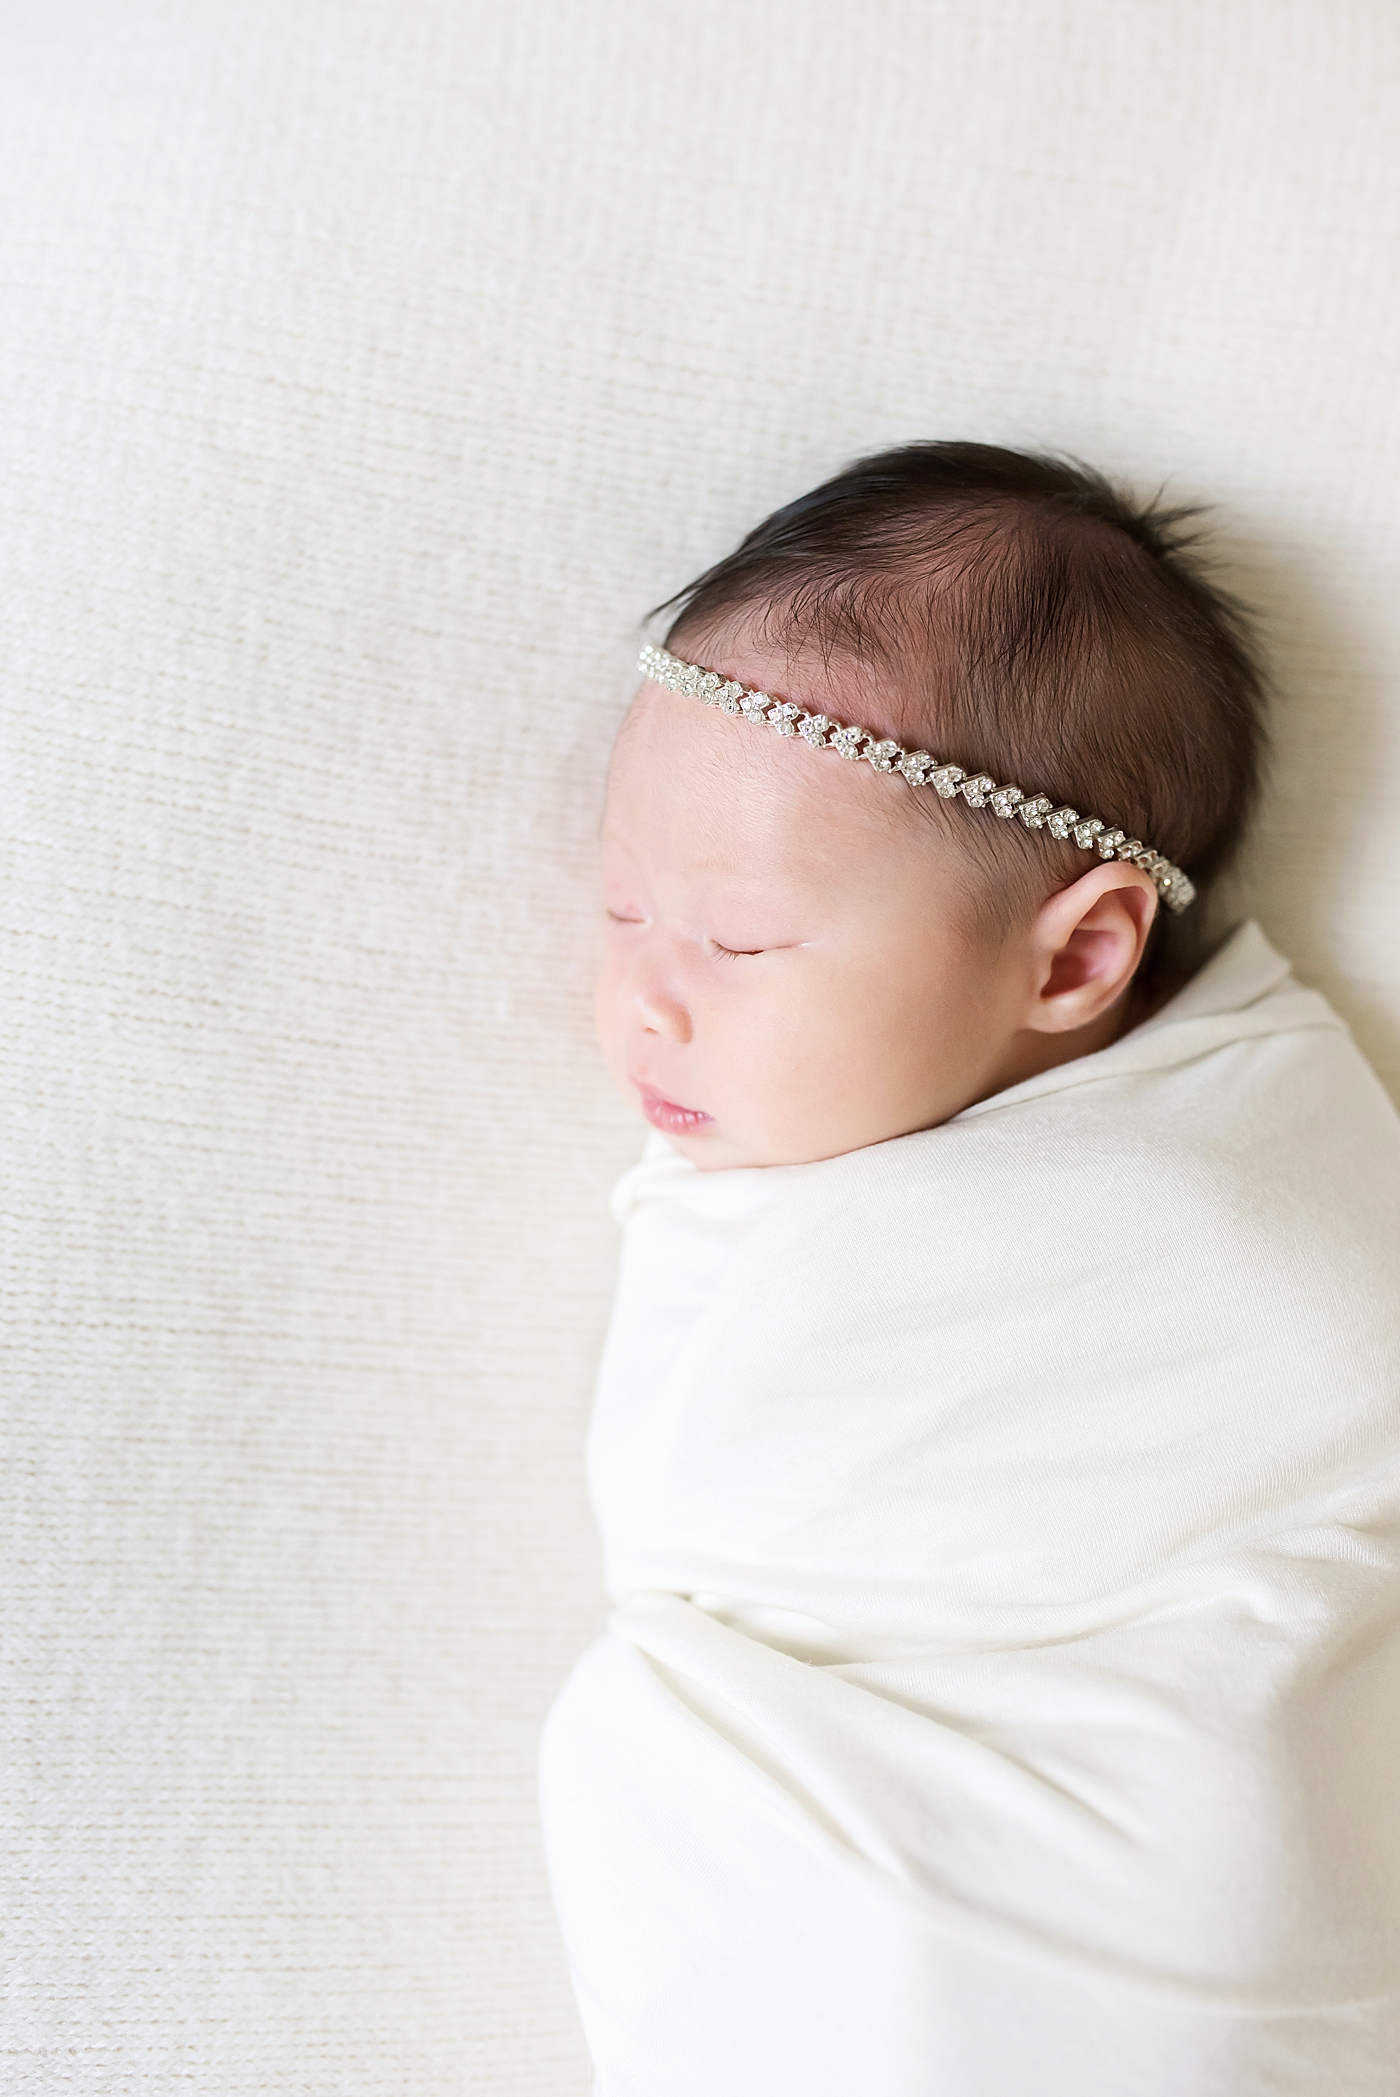 Baby girl with headband asleep in a white swaddle | Photo by Anna Wisjo Photography